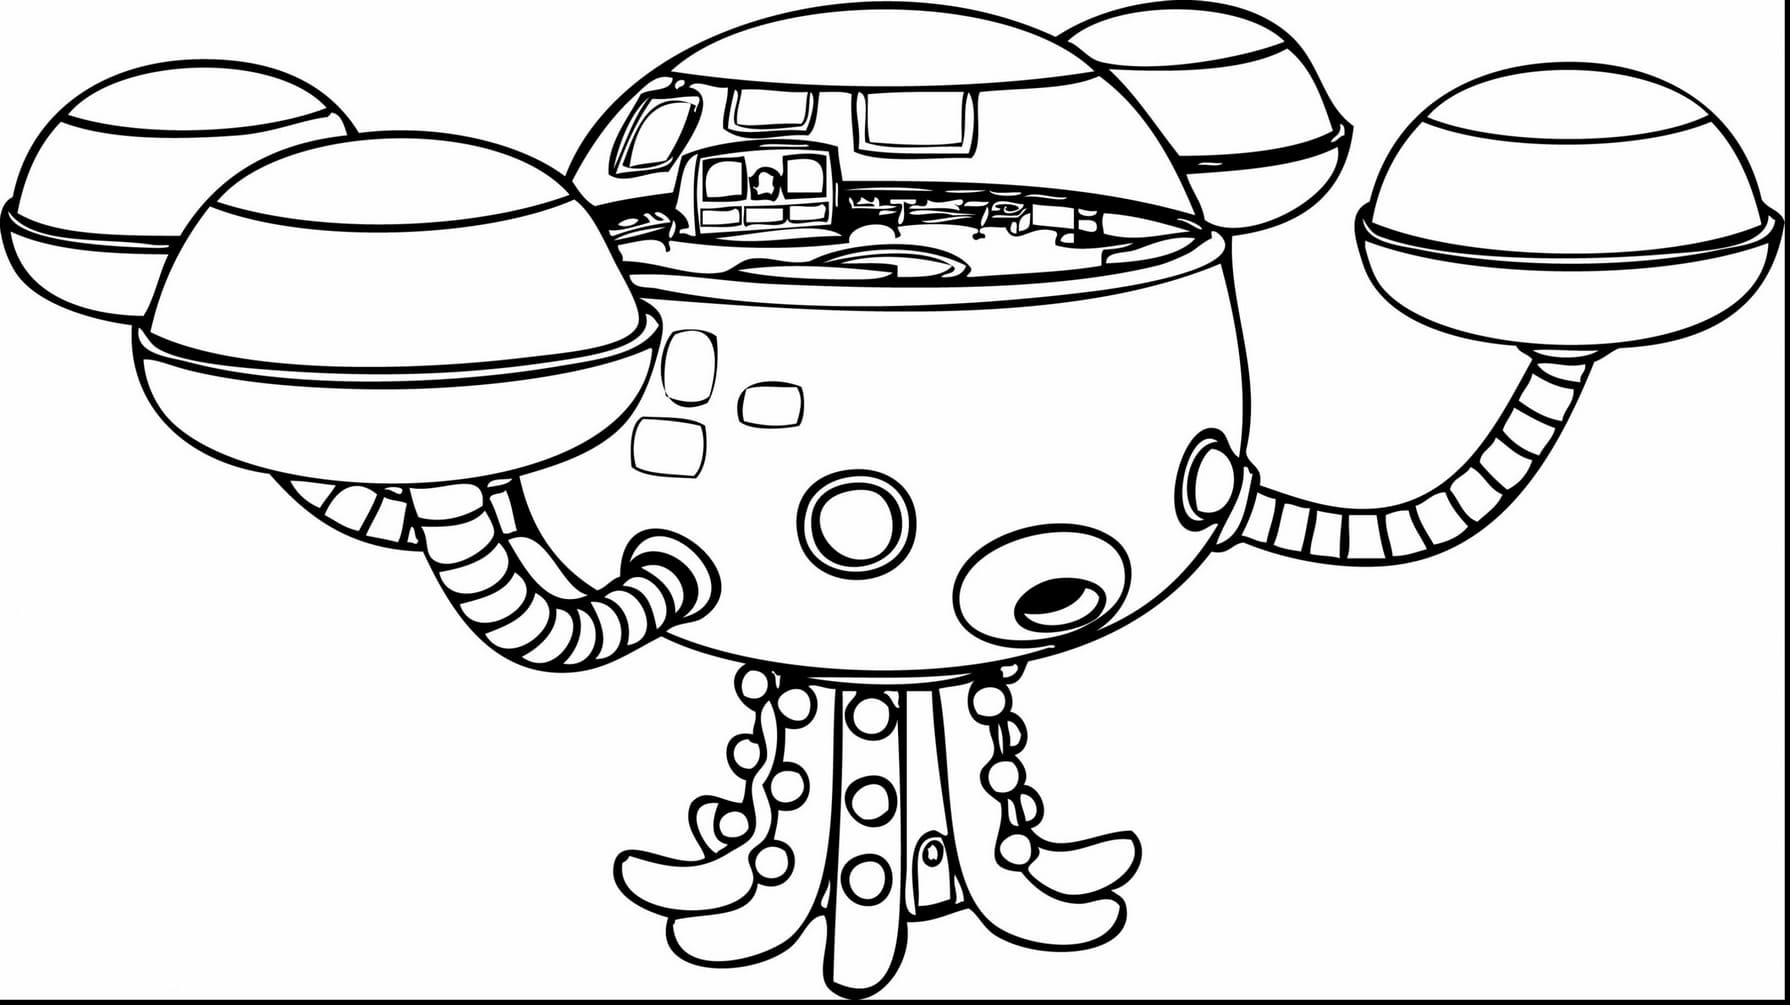 Octonauts Coloring Pages. Print free for Kids   WONDER DAY ...